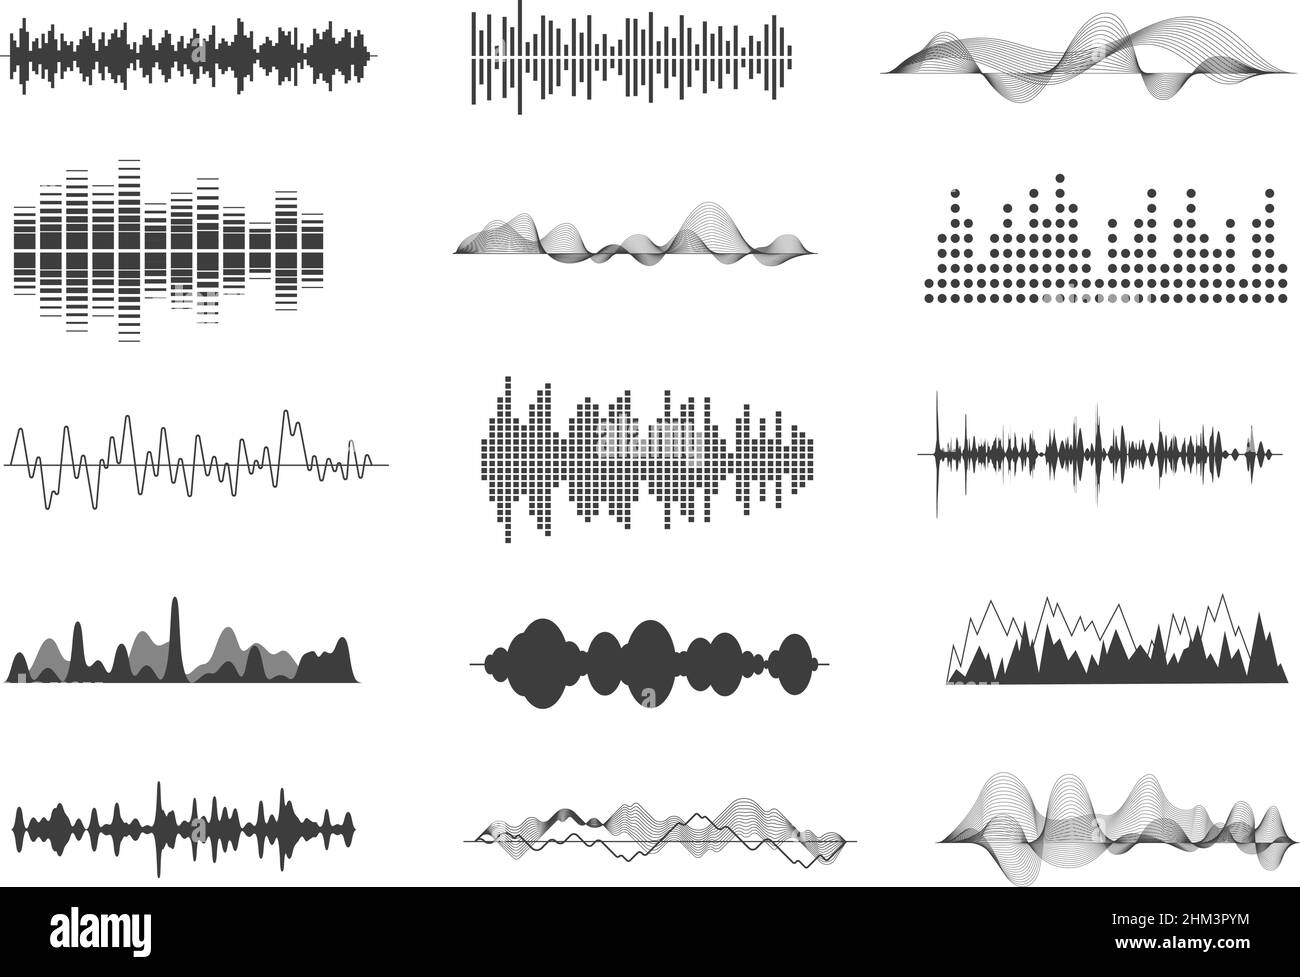 Sound waves. Musical sounds, black wave tracks. Music impulse waveform icons. Voice radio audio track. Exact signal amplitude vector collection Stock Vector